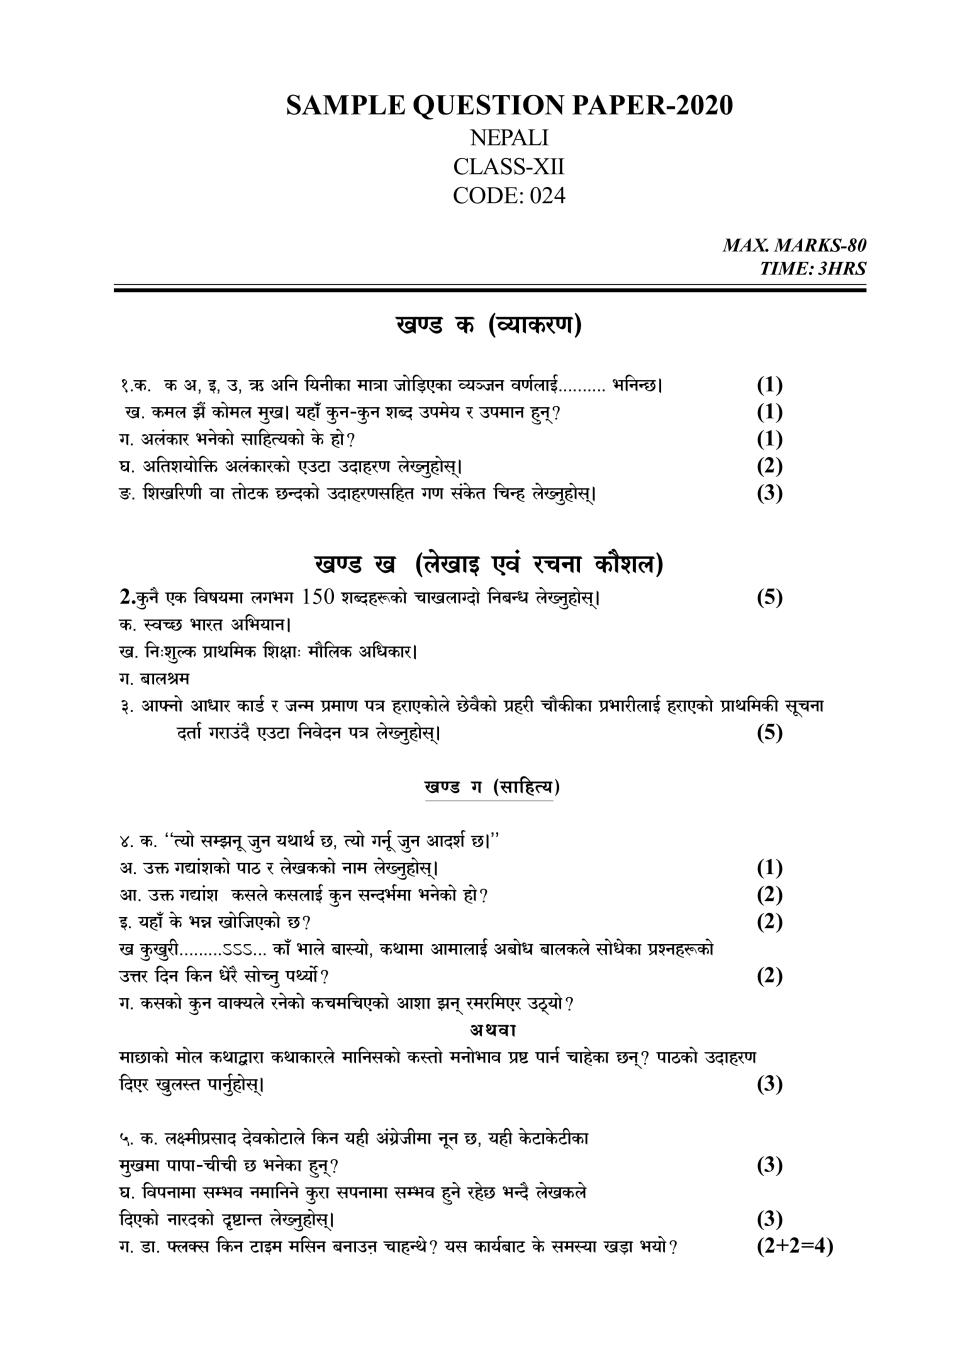 CBSE Class 12 Sample Paper 2020 for Nepali - Page 1